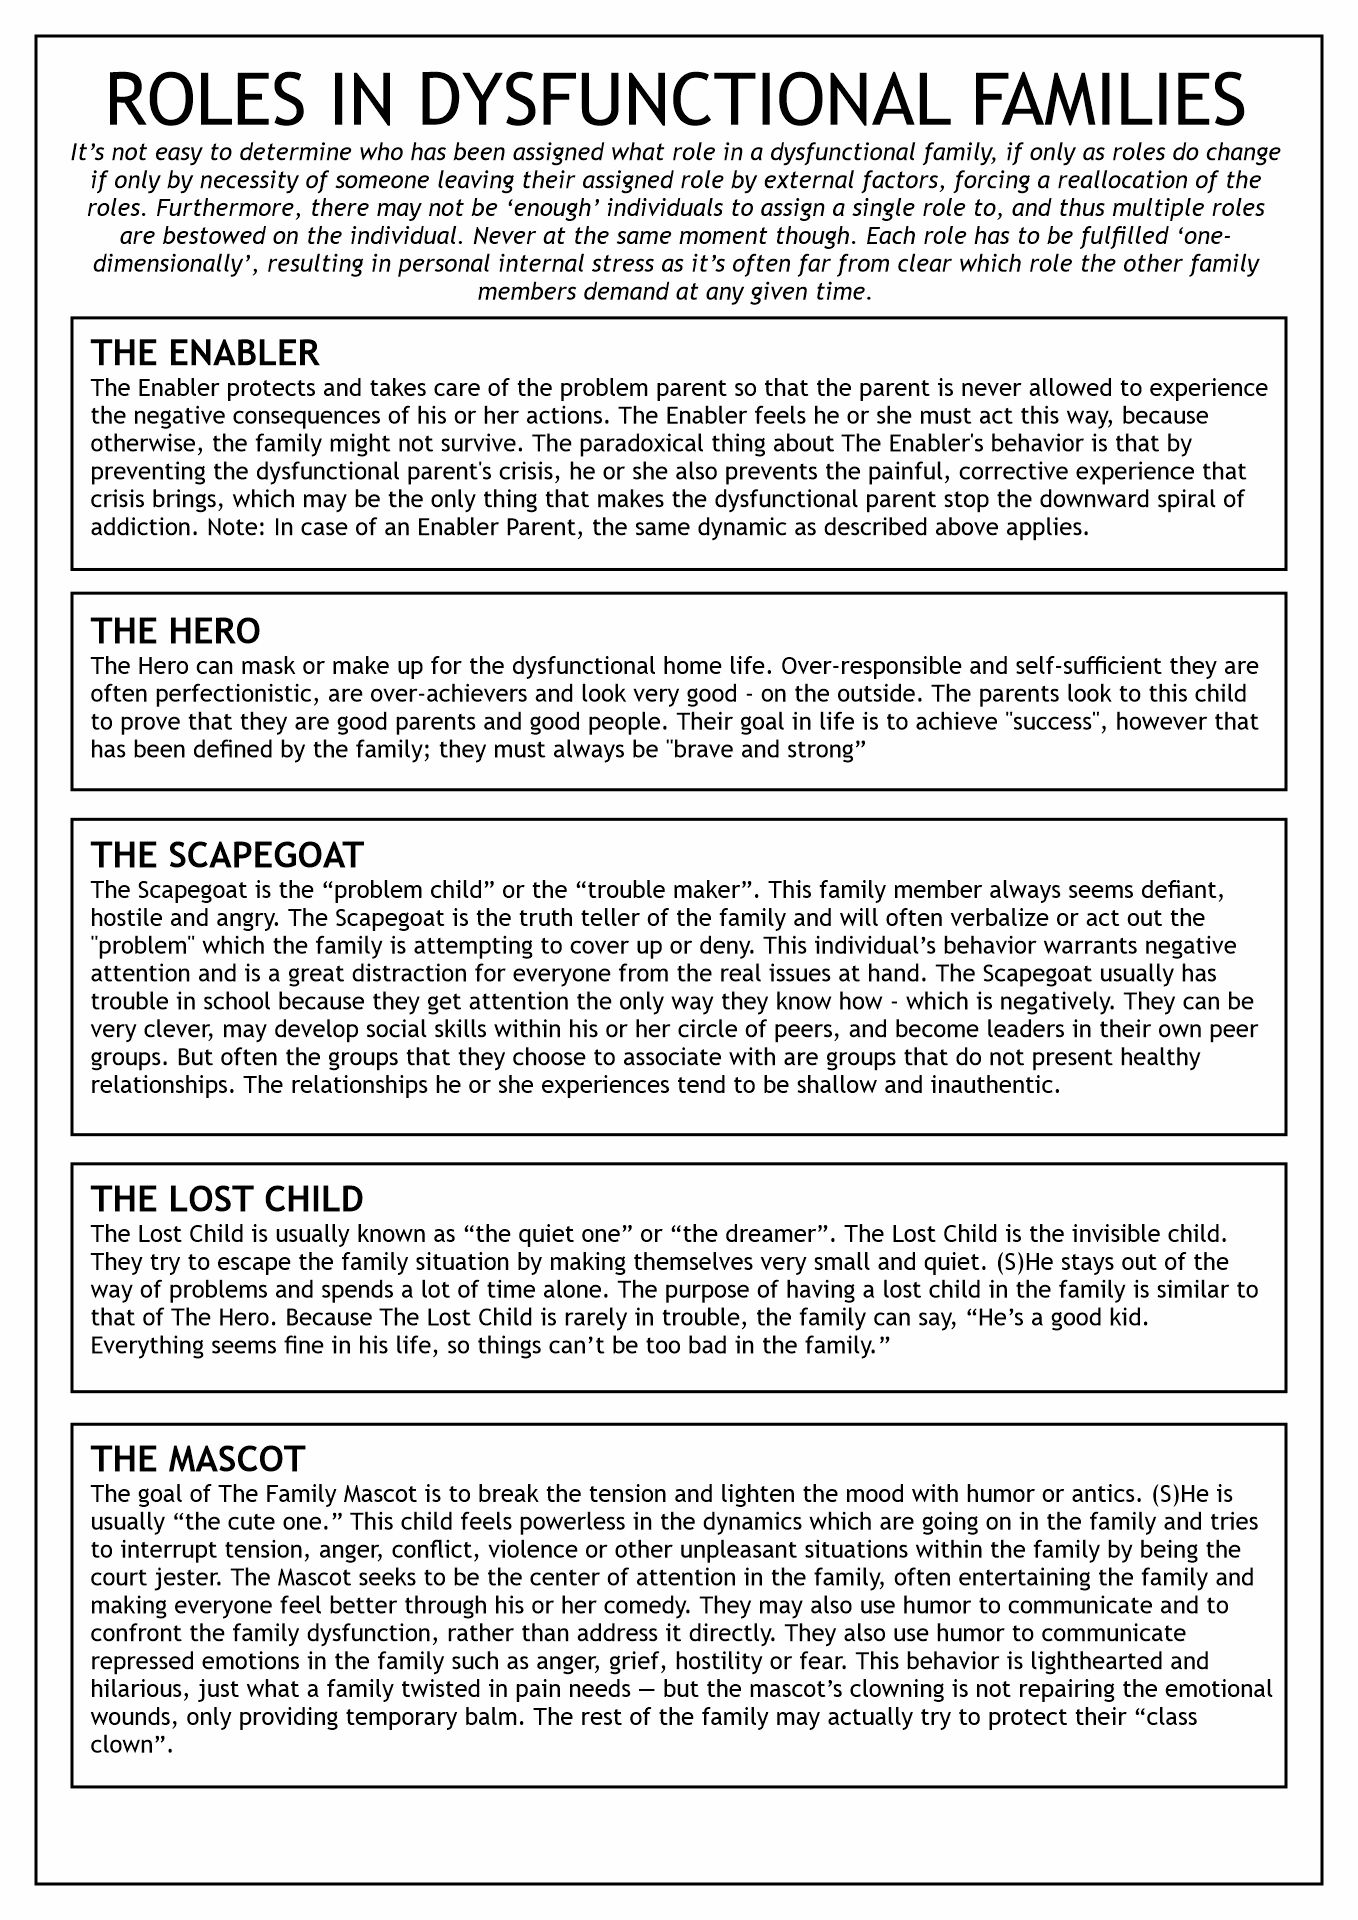 printable-dysfunctional-family-roles-worksheets